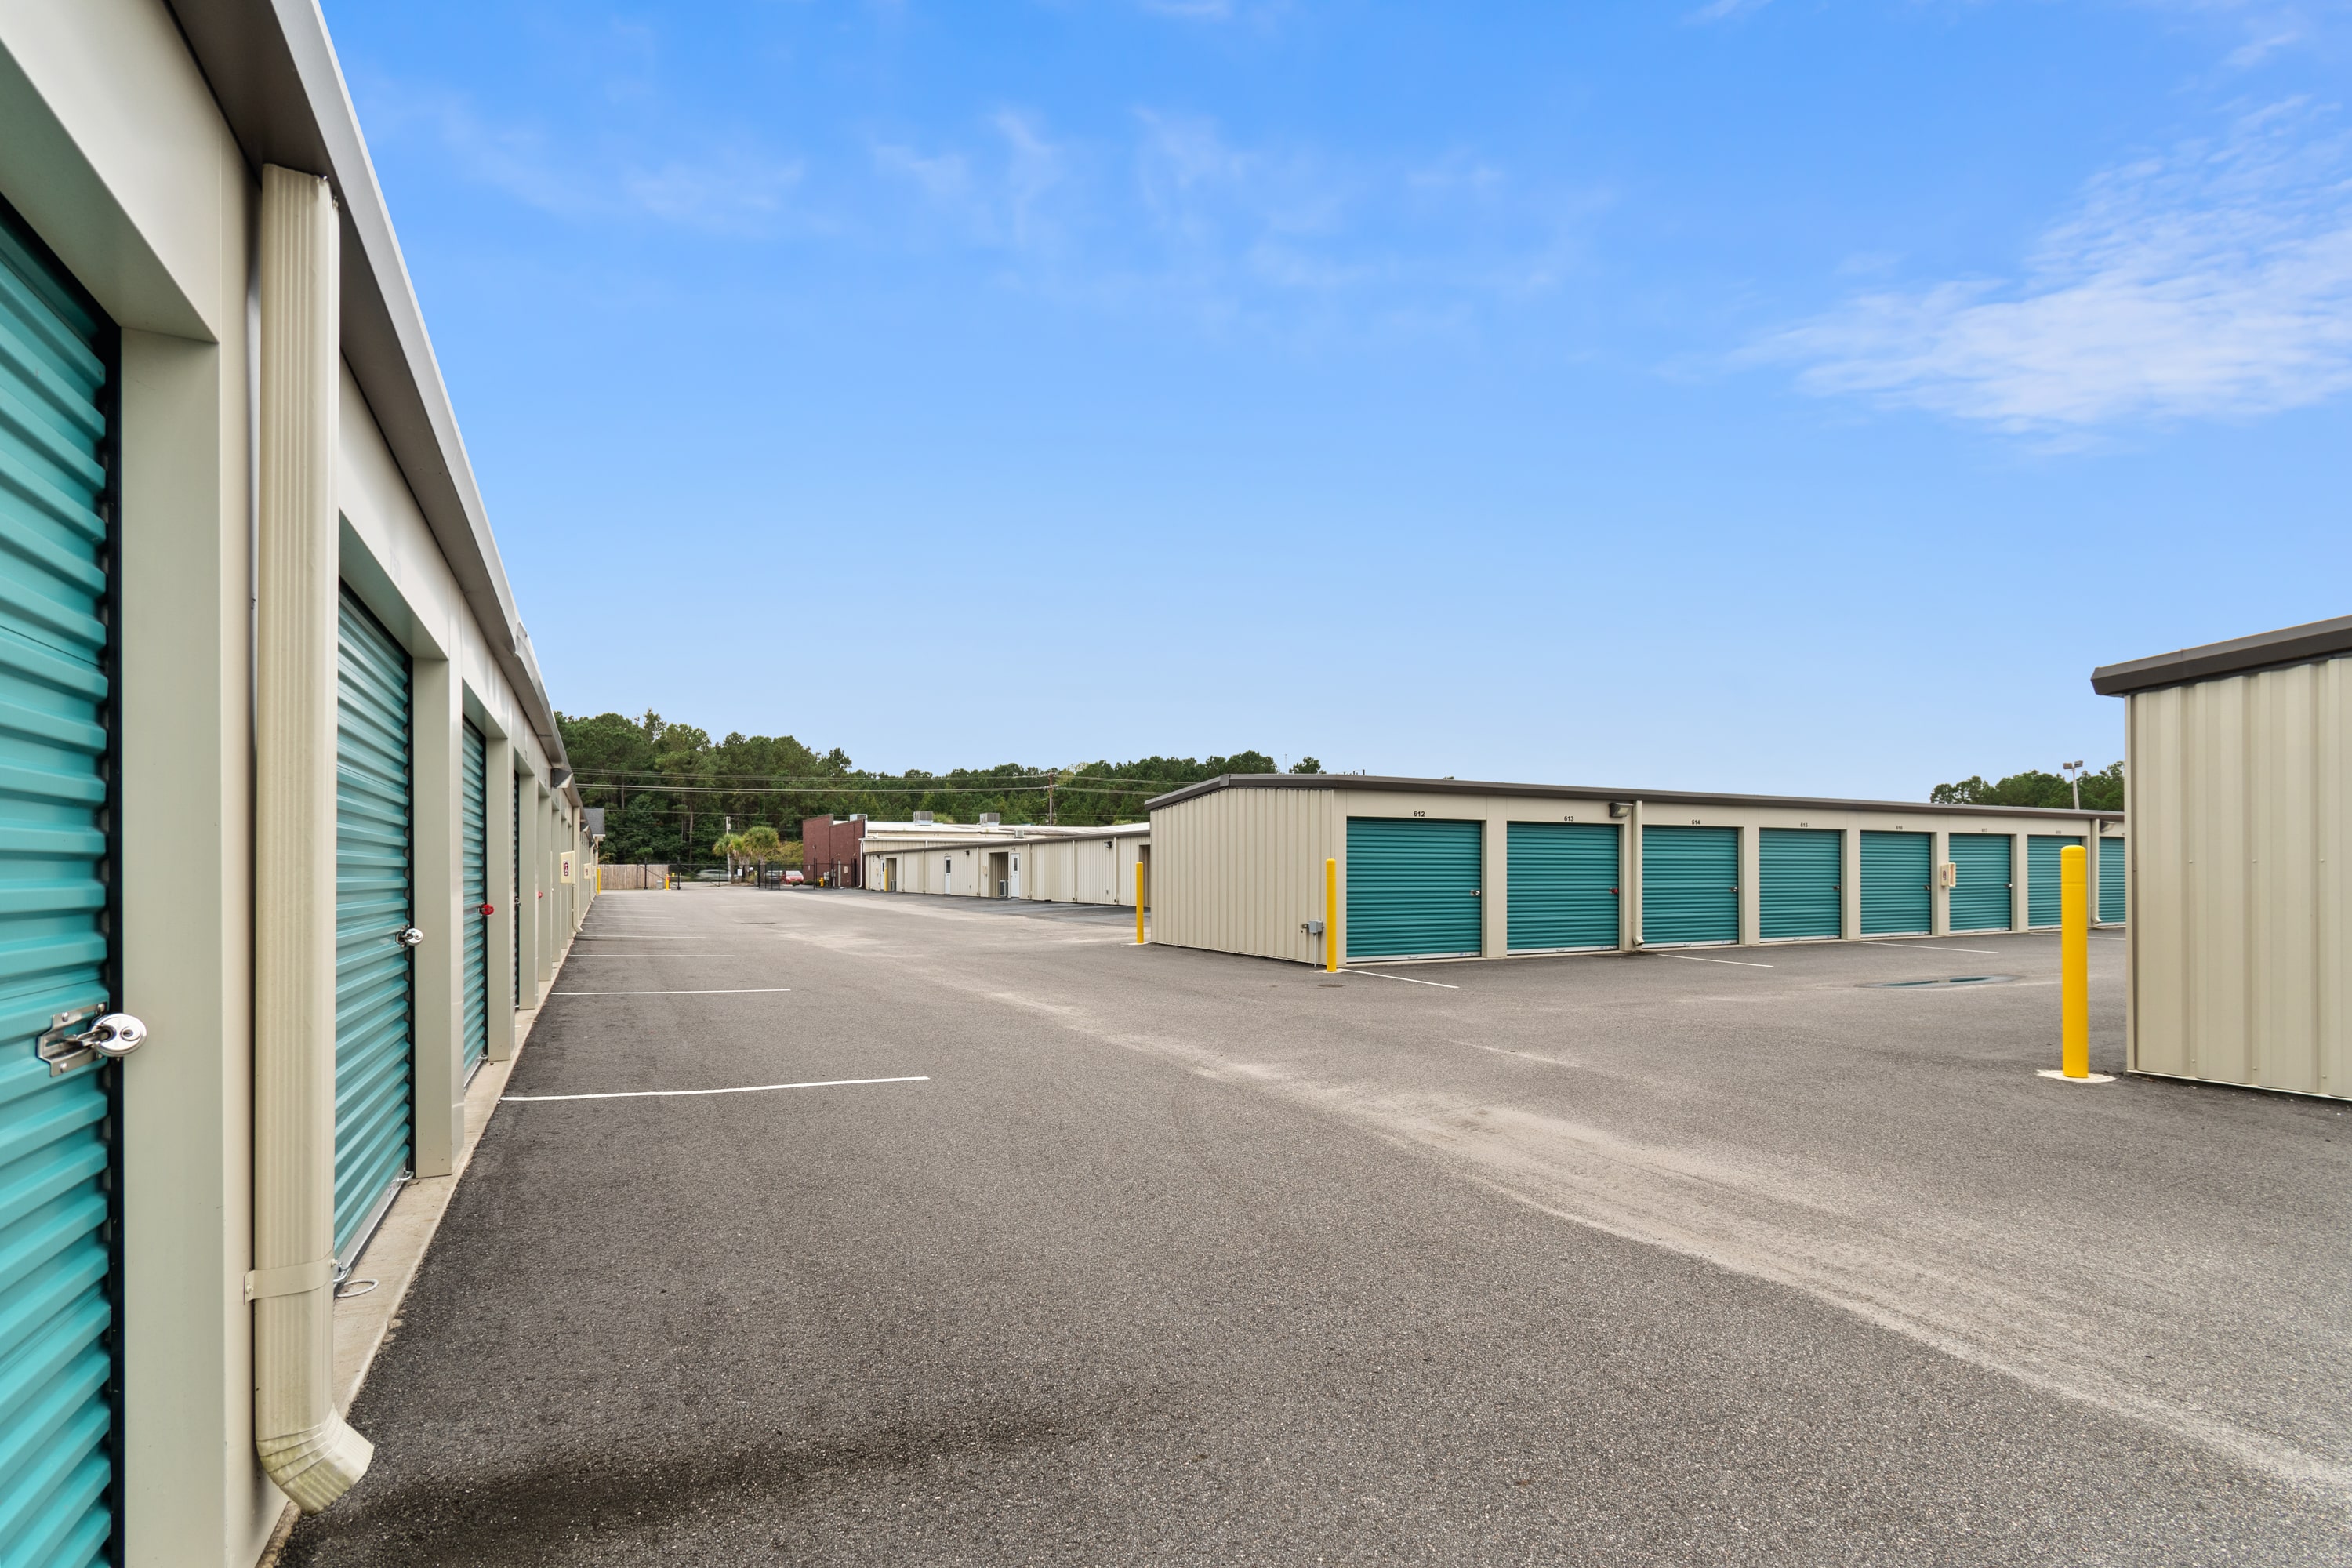 Meet all of your self storage needs in Little River, SC at our South Carolina 905 location | SpareBox Storage